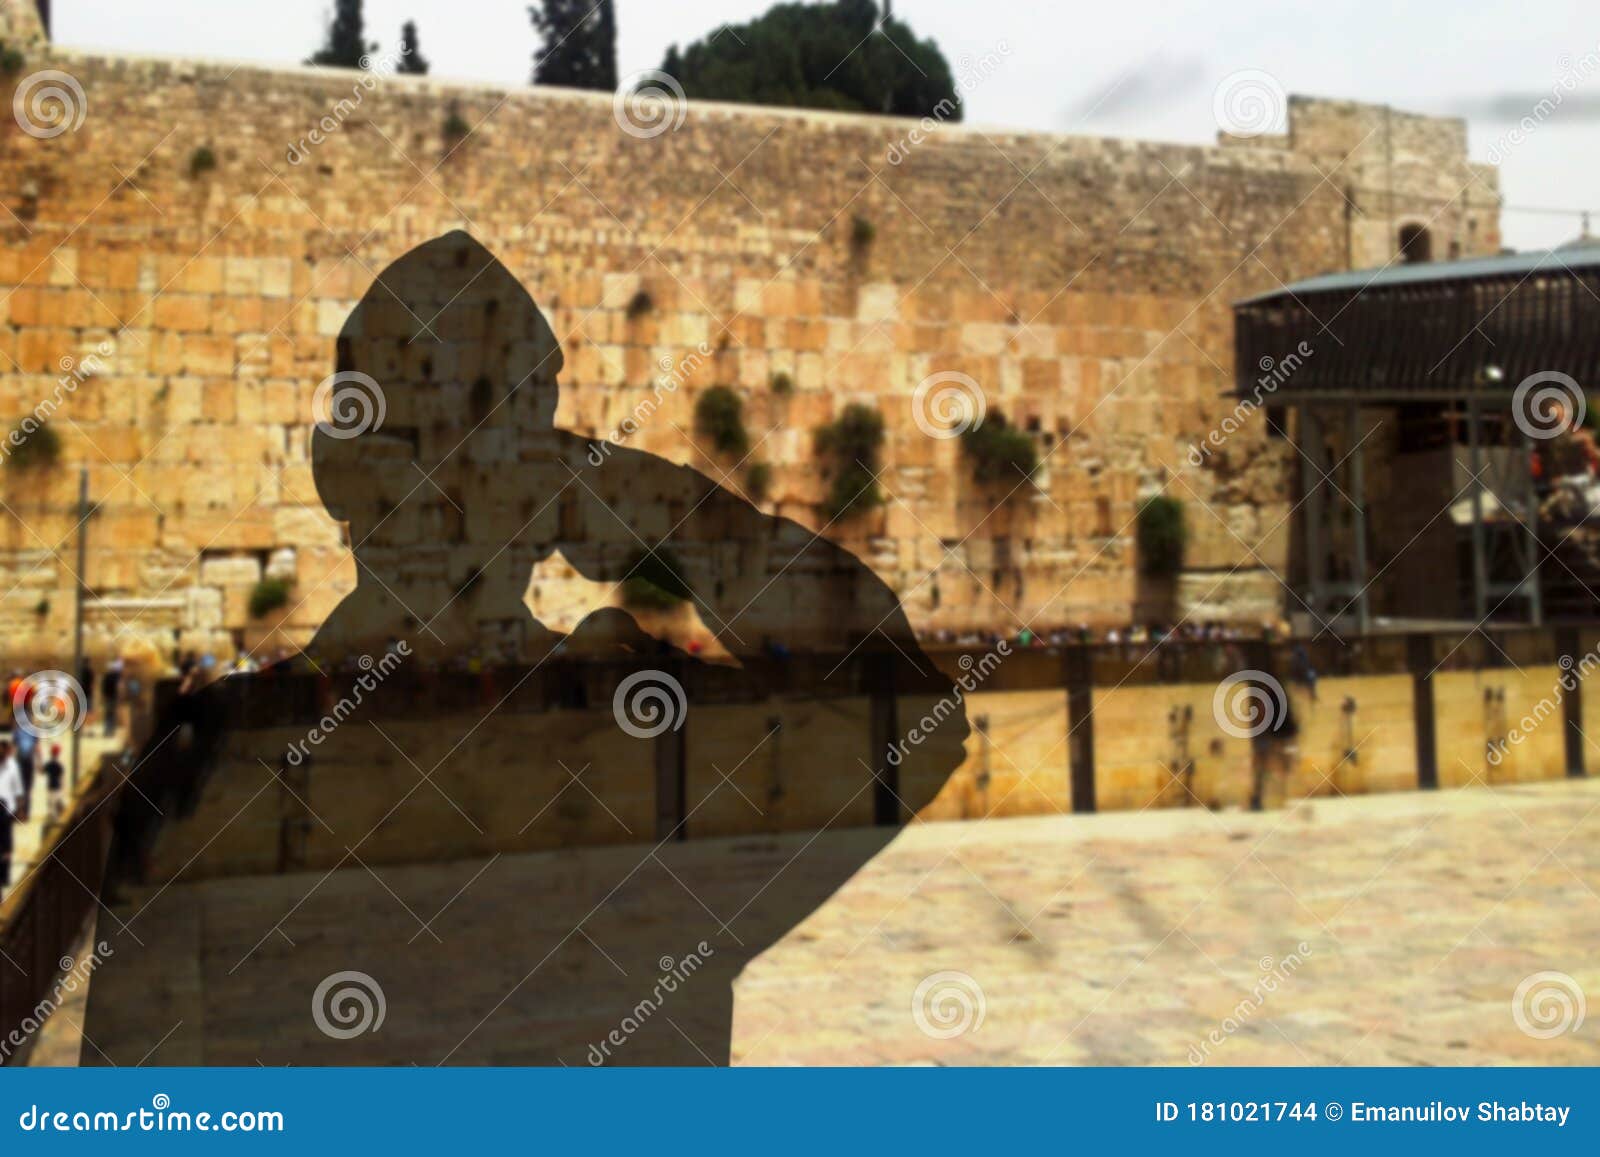 shadow silhouette of a israeli soldier israel defense forces, idf salutes on a western wall kotel in old city of jerusalem